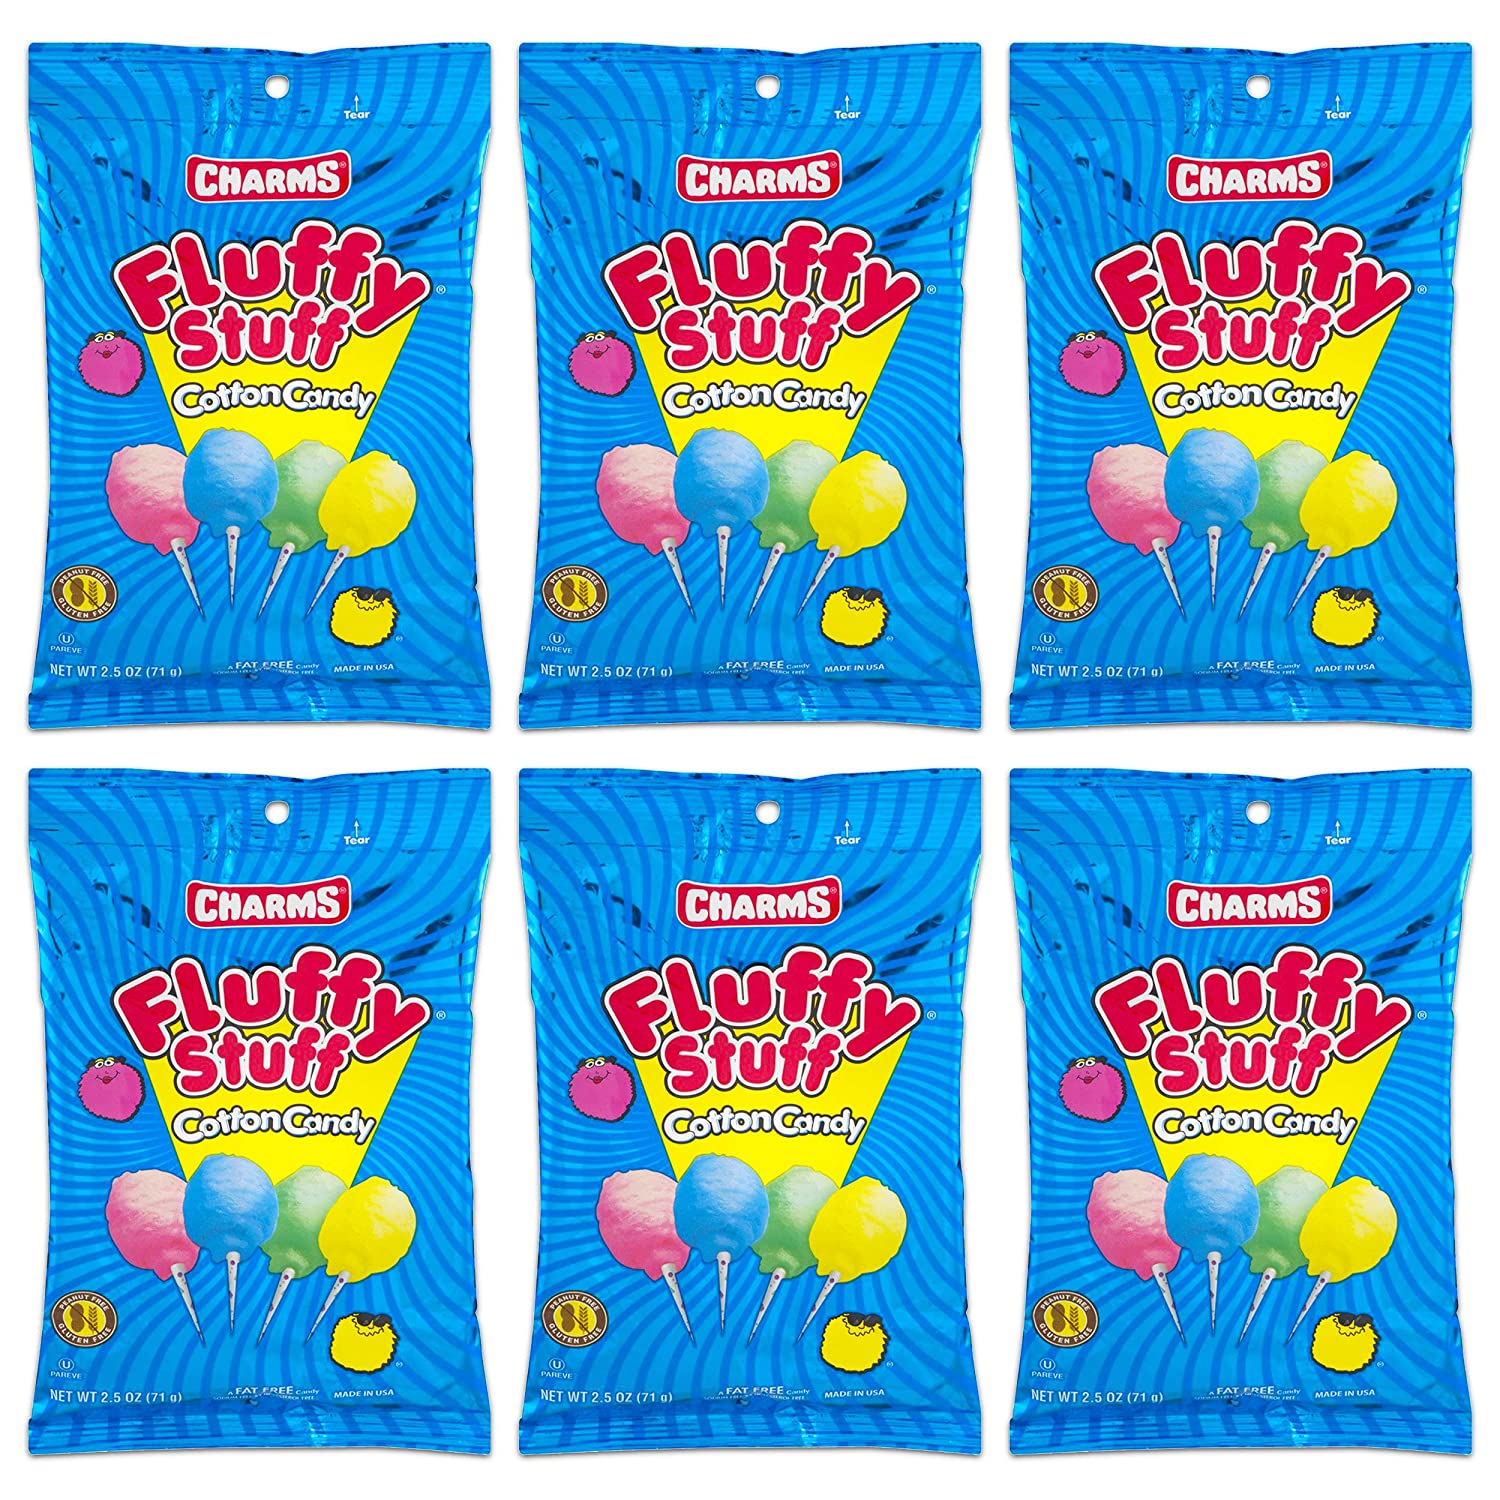 Charms Fluffy Stuff Cotton Candy, 2.5-Ounce Bags, Pack of 6 (Total